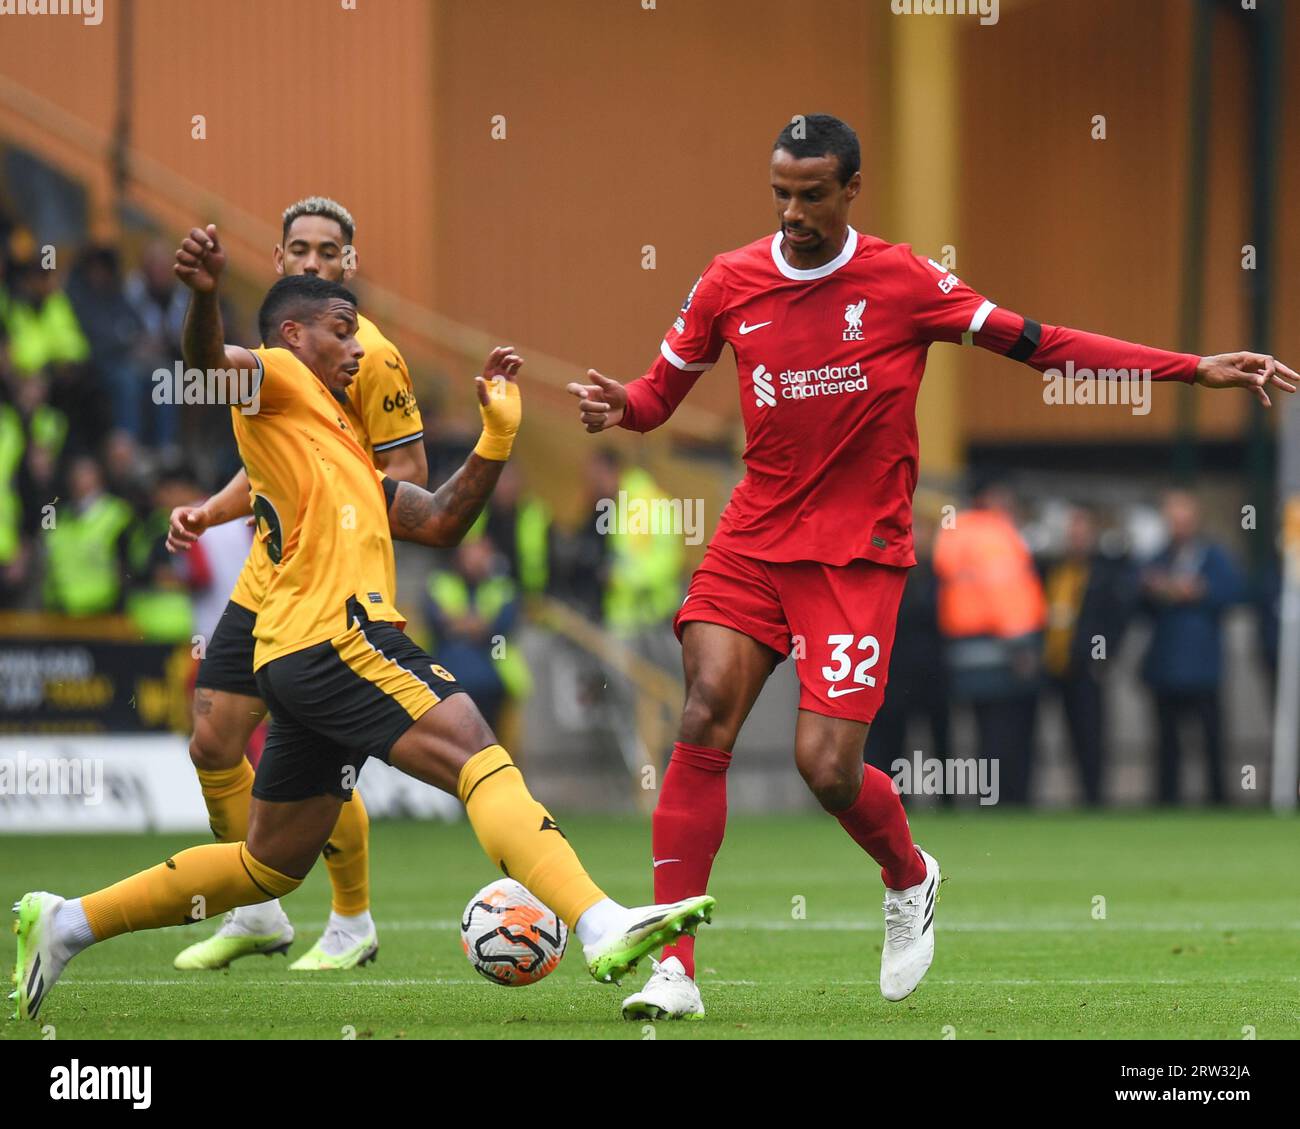 Mario Lemina #5 of Wolverhampton Wanderers tackles Joel Matip #32 of Liverpool during the Premier League match Wolverhampton Wanderers vs Liverpool at Molineux, Wolverhampton, United Kingdom, 16th September 2023  (Photo by Mike Jones/News Images) Stock Photo